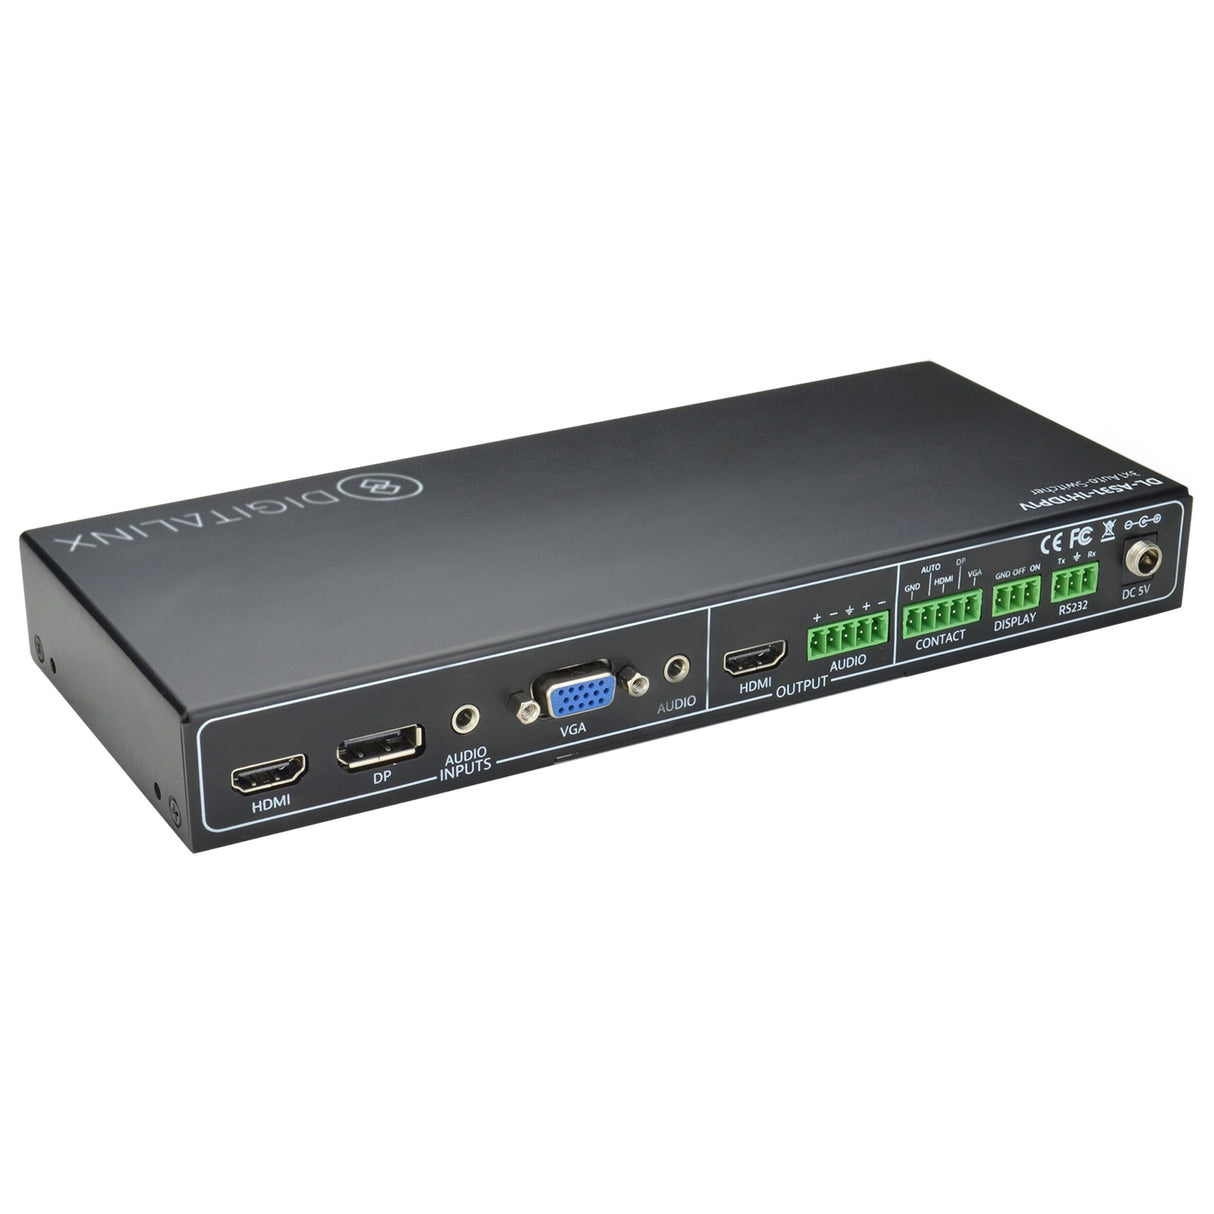 DigitaLinx DL-AS31-1H1DP1V 3 x 1 Auto Switcher with HDMI, Display Port and VGA Inputs